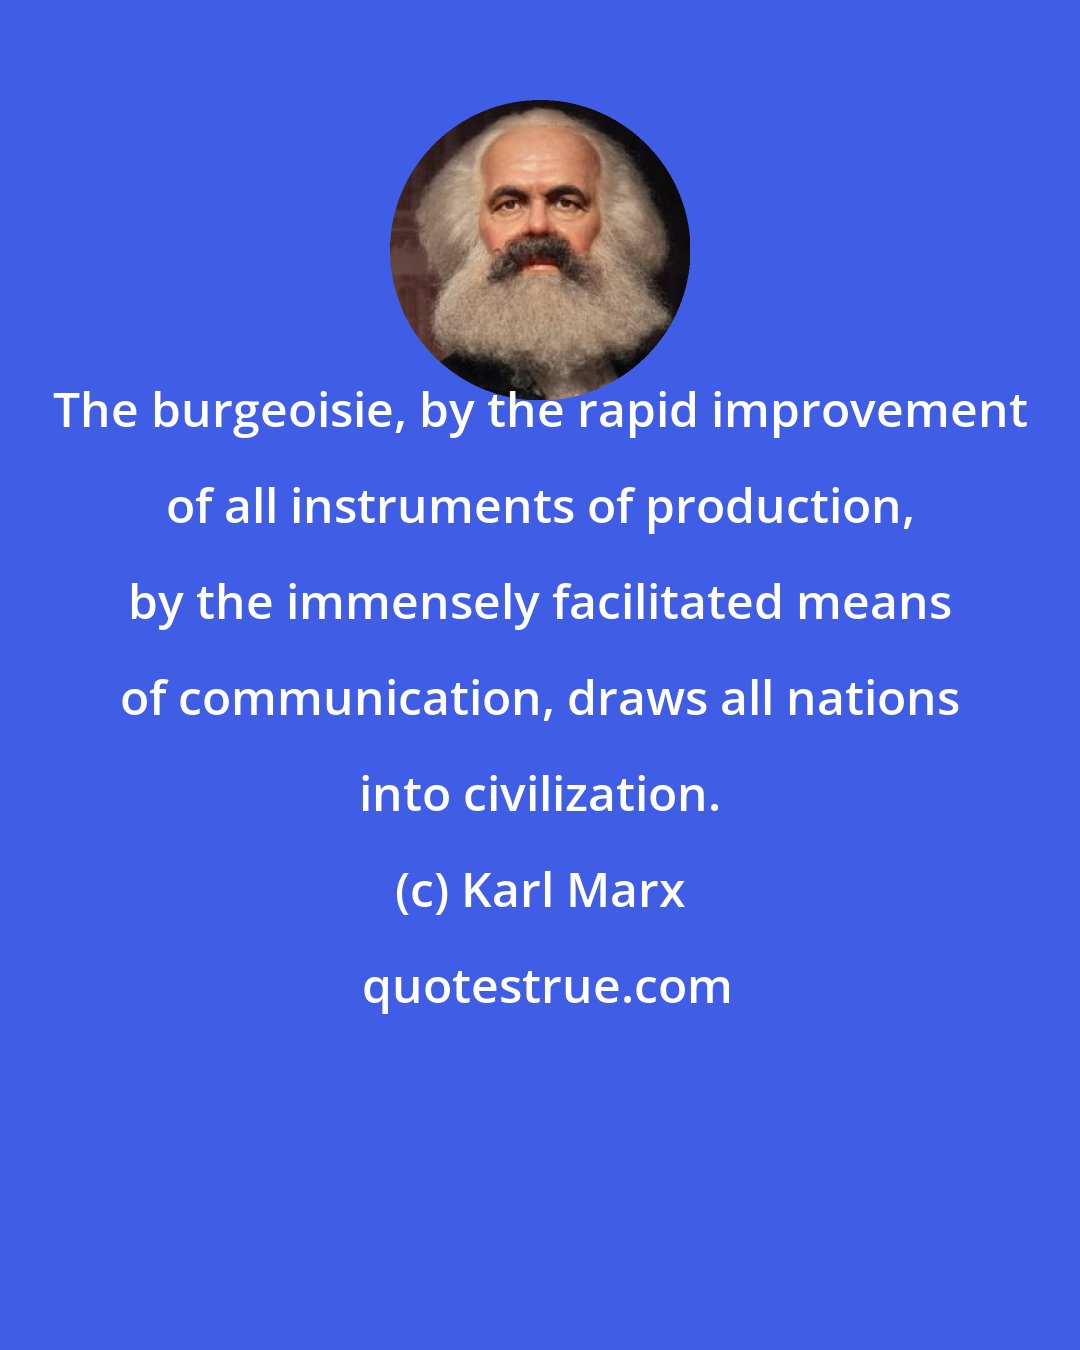 Karl Marx: The burgeoisie, by the rapid improvement of all instruments of production, by the immensely facilitated means of communication, draws all nations into civilization.